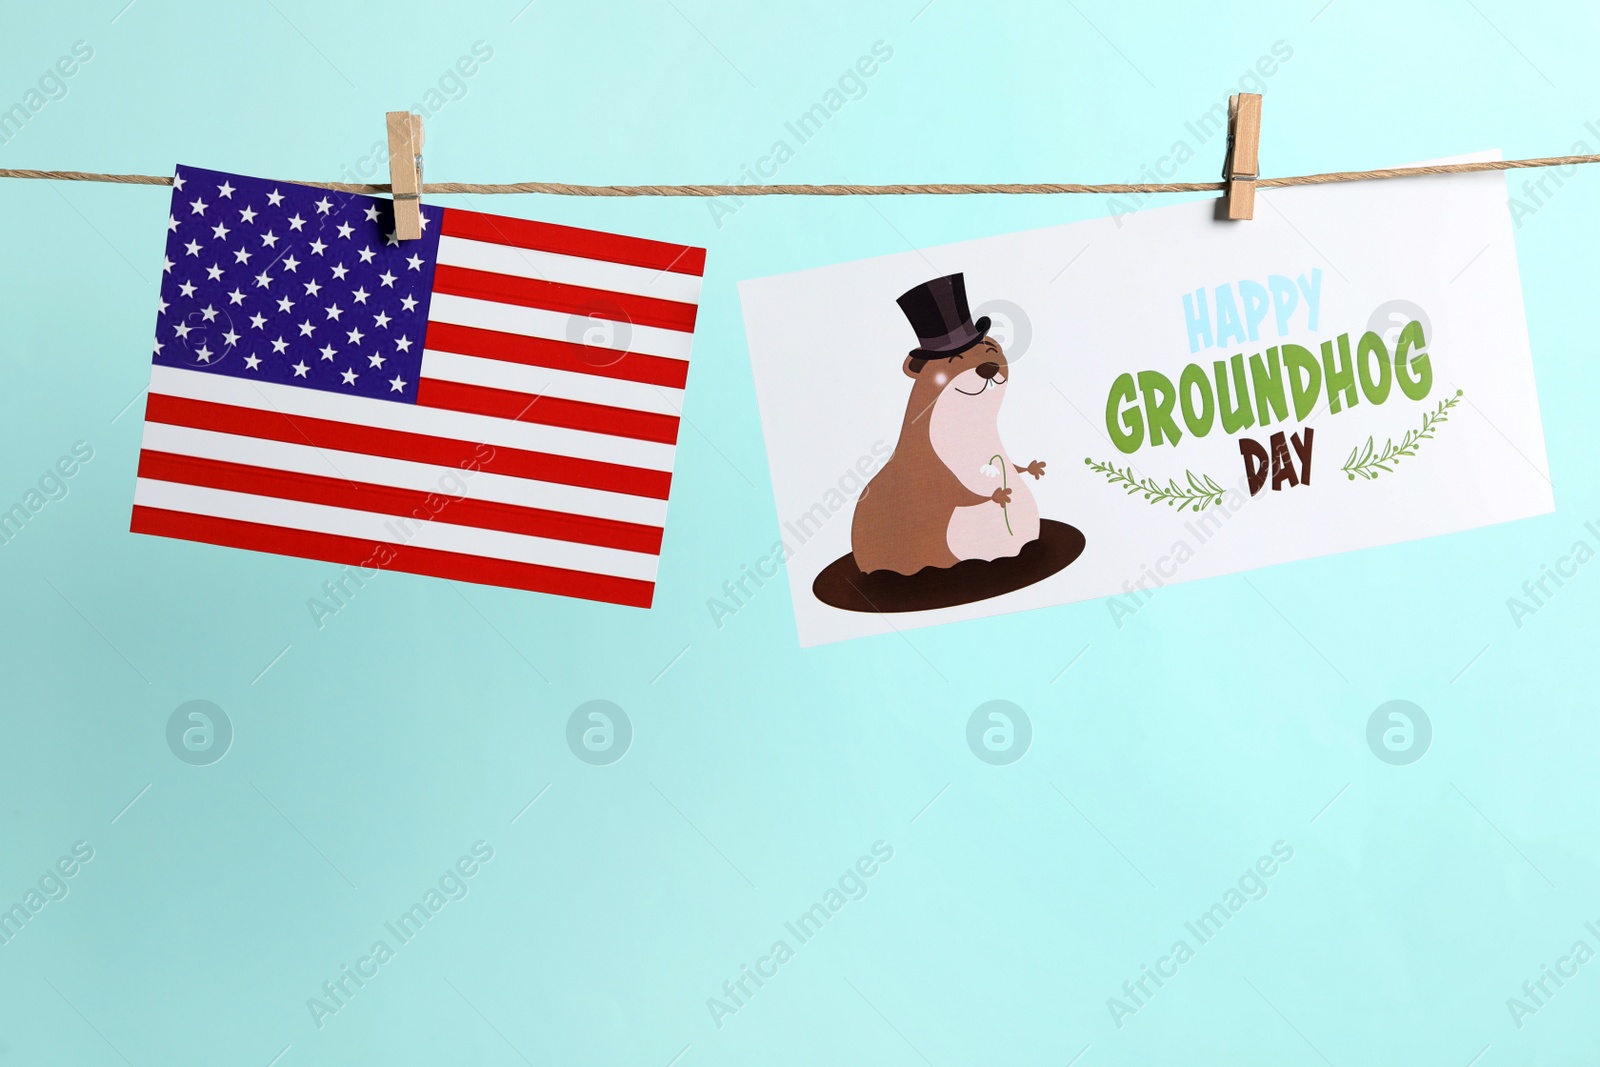 Photo of Happy Groundhog Day greeting card and American flag hanging on turquoise background, space for text